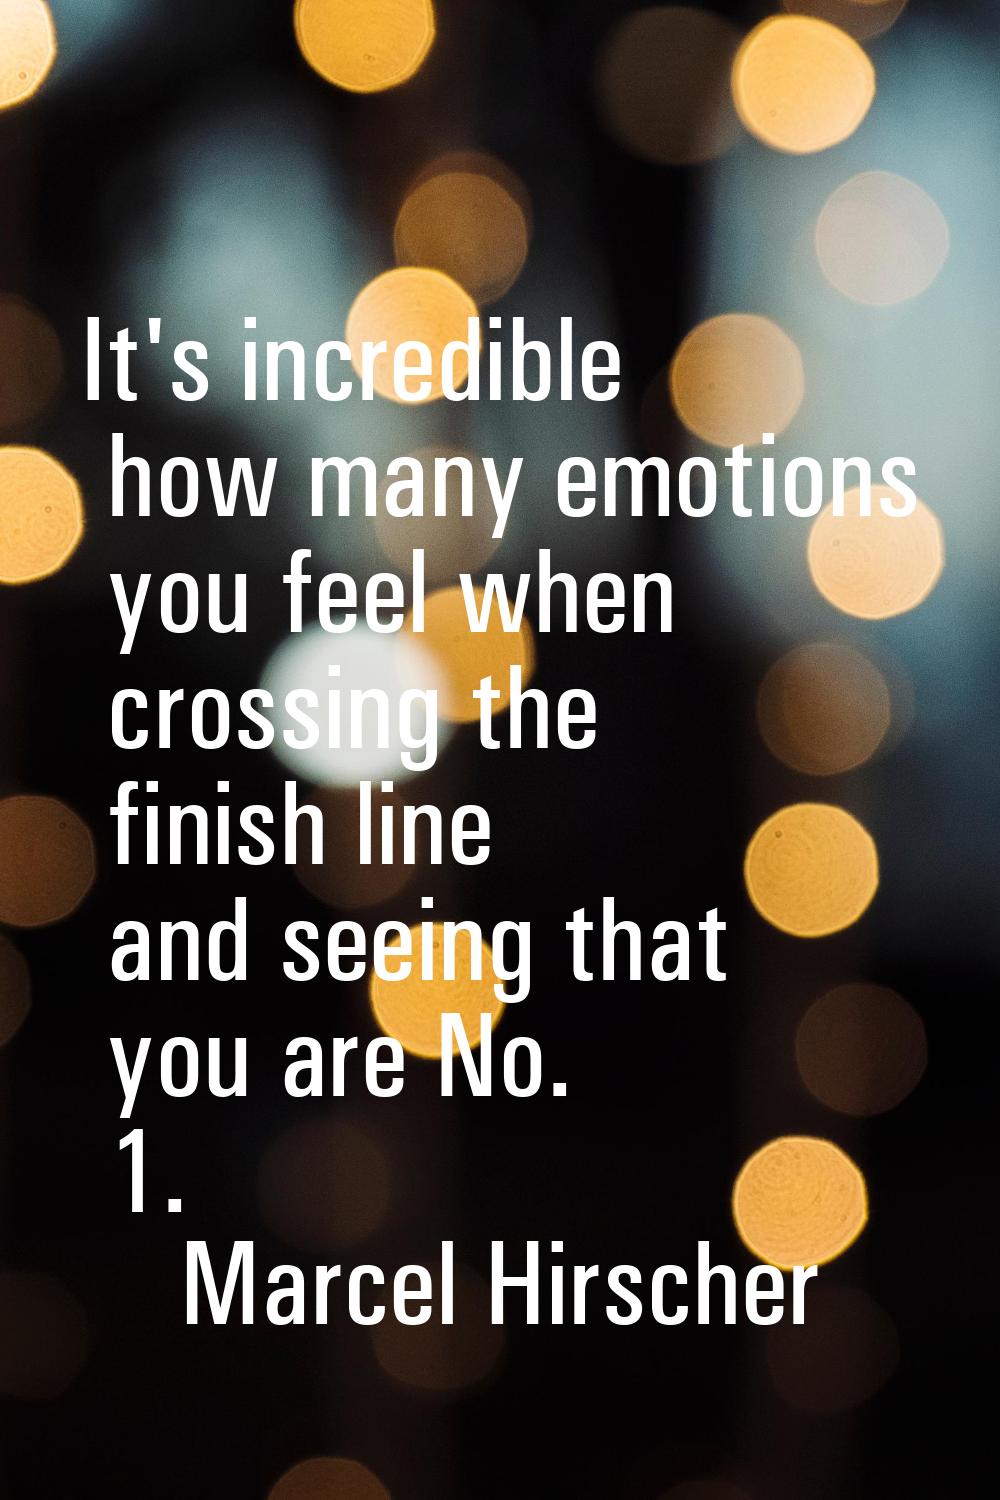 It's incredible how many emotions you feel when crossing the finish line and seeing that you are No